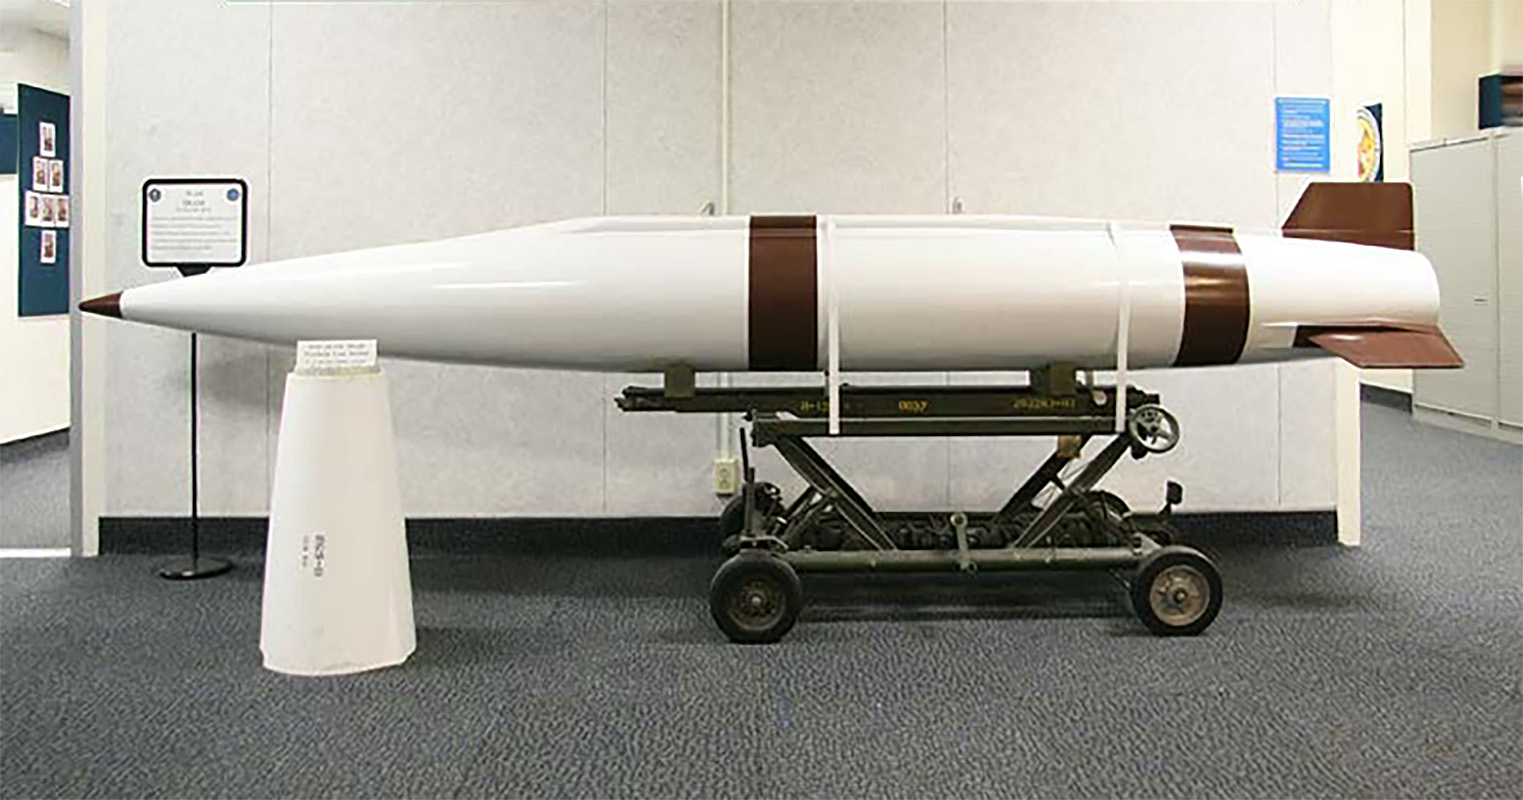 Quality of replacement triggers for nuclear warheads questioned, National